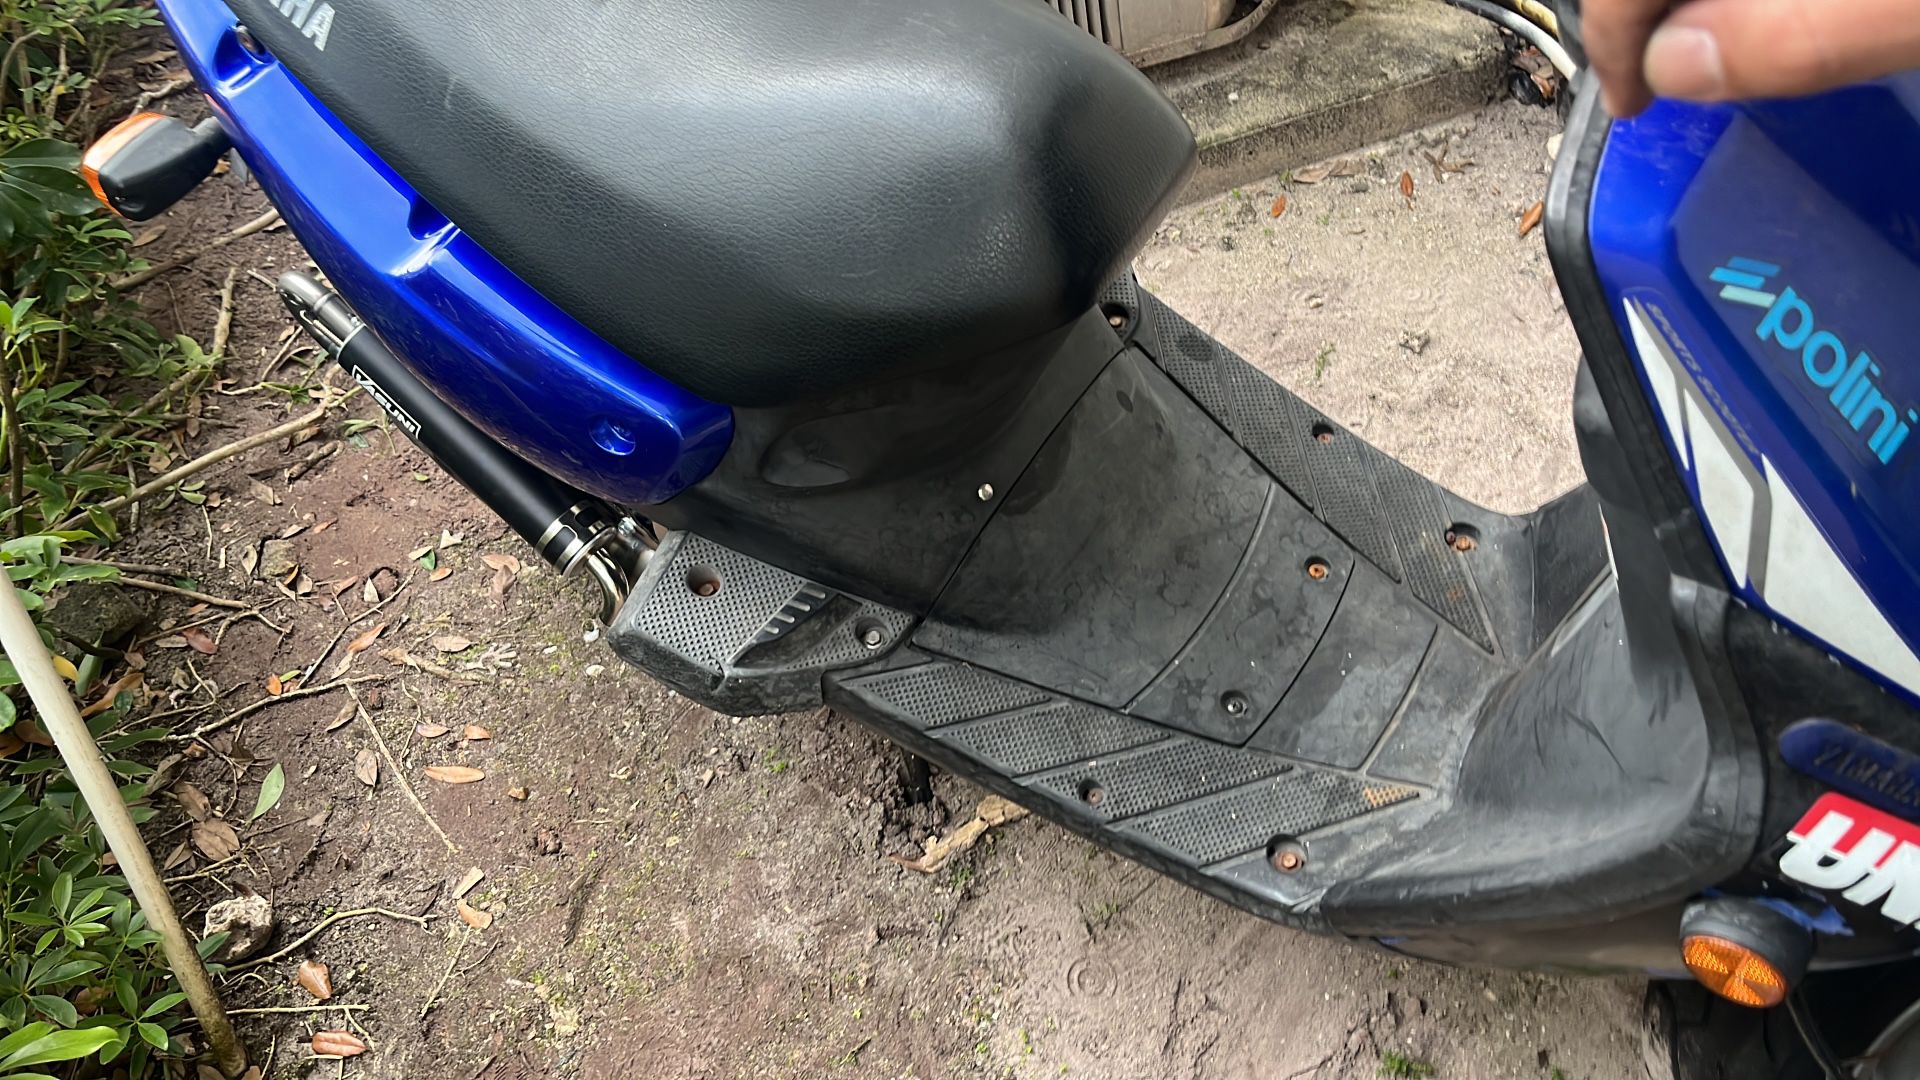 Yamaha Sport Scooter Blue For Sale